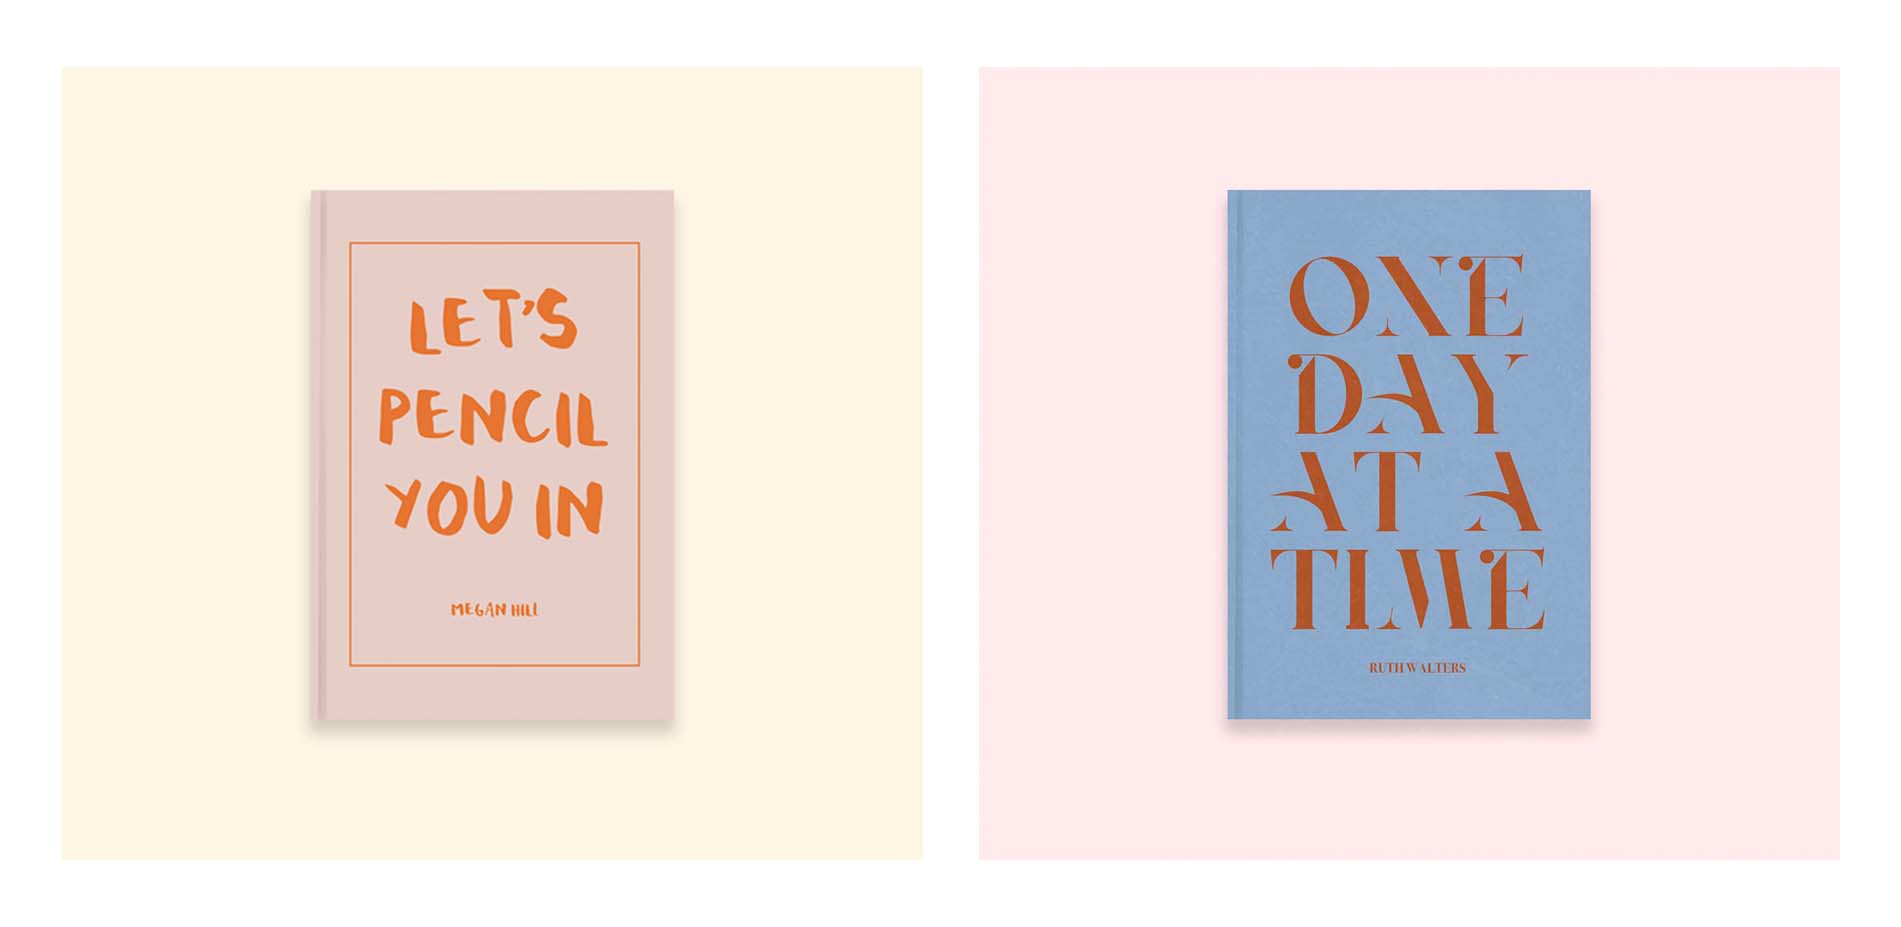 Two typographic academic diaries with the quotes 'Let's Pencil You In' and 'One day at a Time', in pinks, blues and oranges.